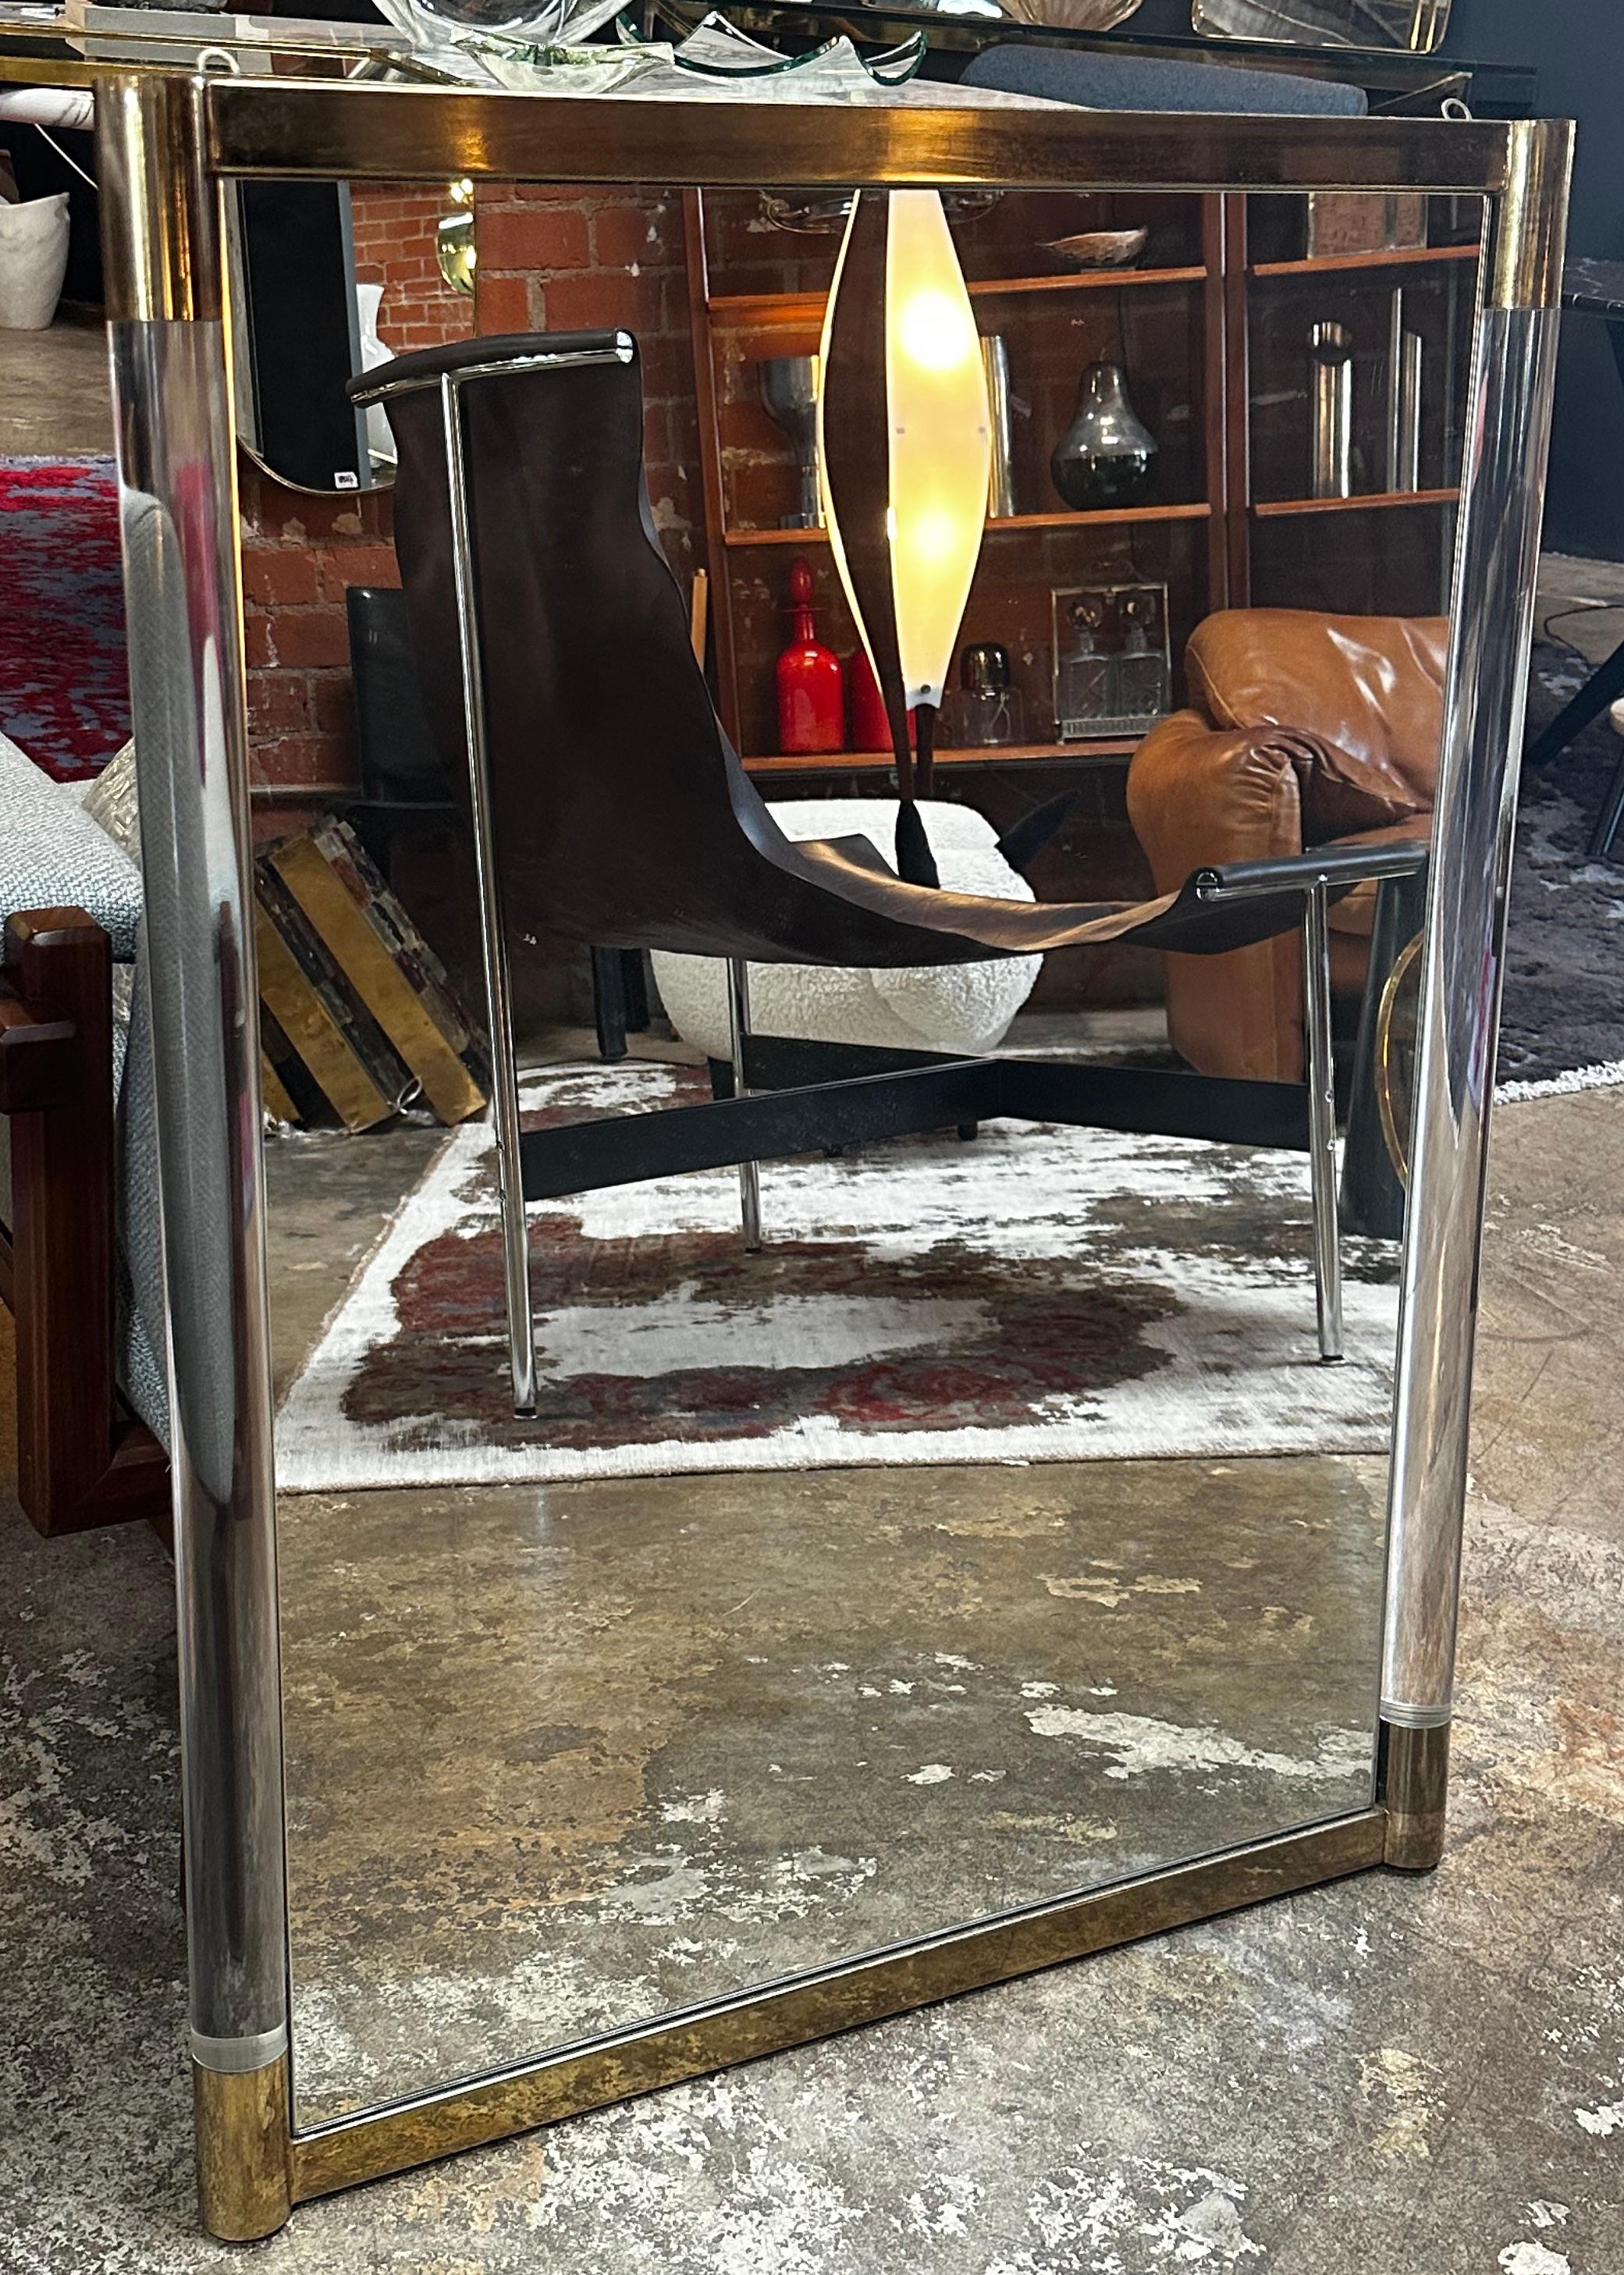 This rectangular wall mirror is a stunning example of modern Italian design. The sleek frame is made of a combination of brass and plexiglass, creating a unique and stylish look that is both contemporary and timeless. The use of plexiglass gives the